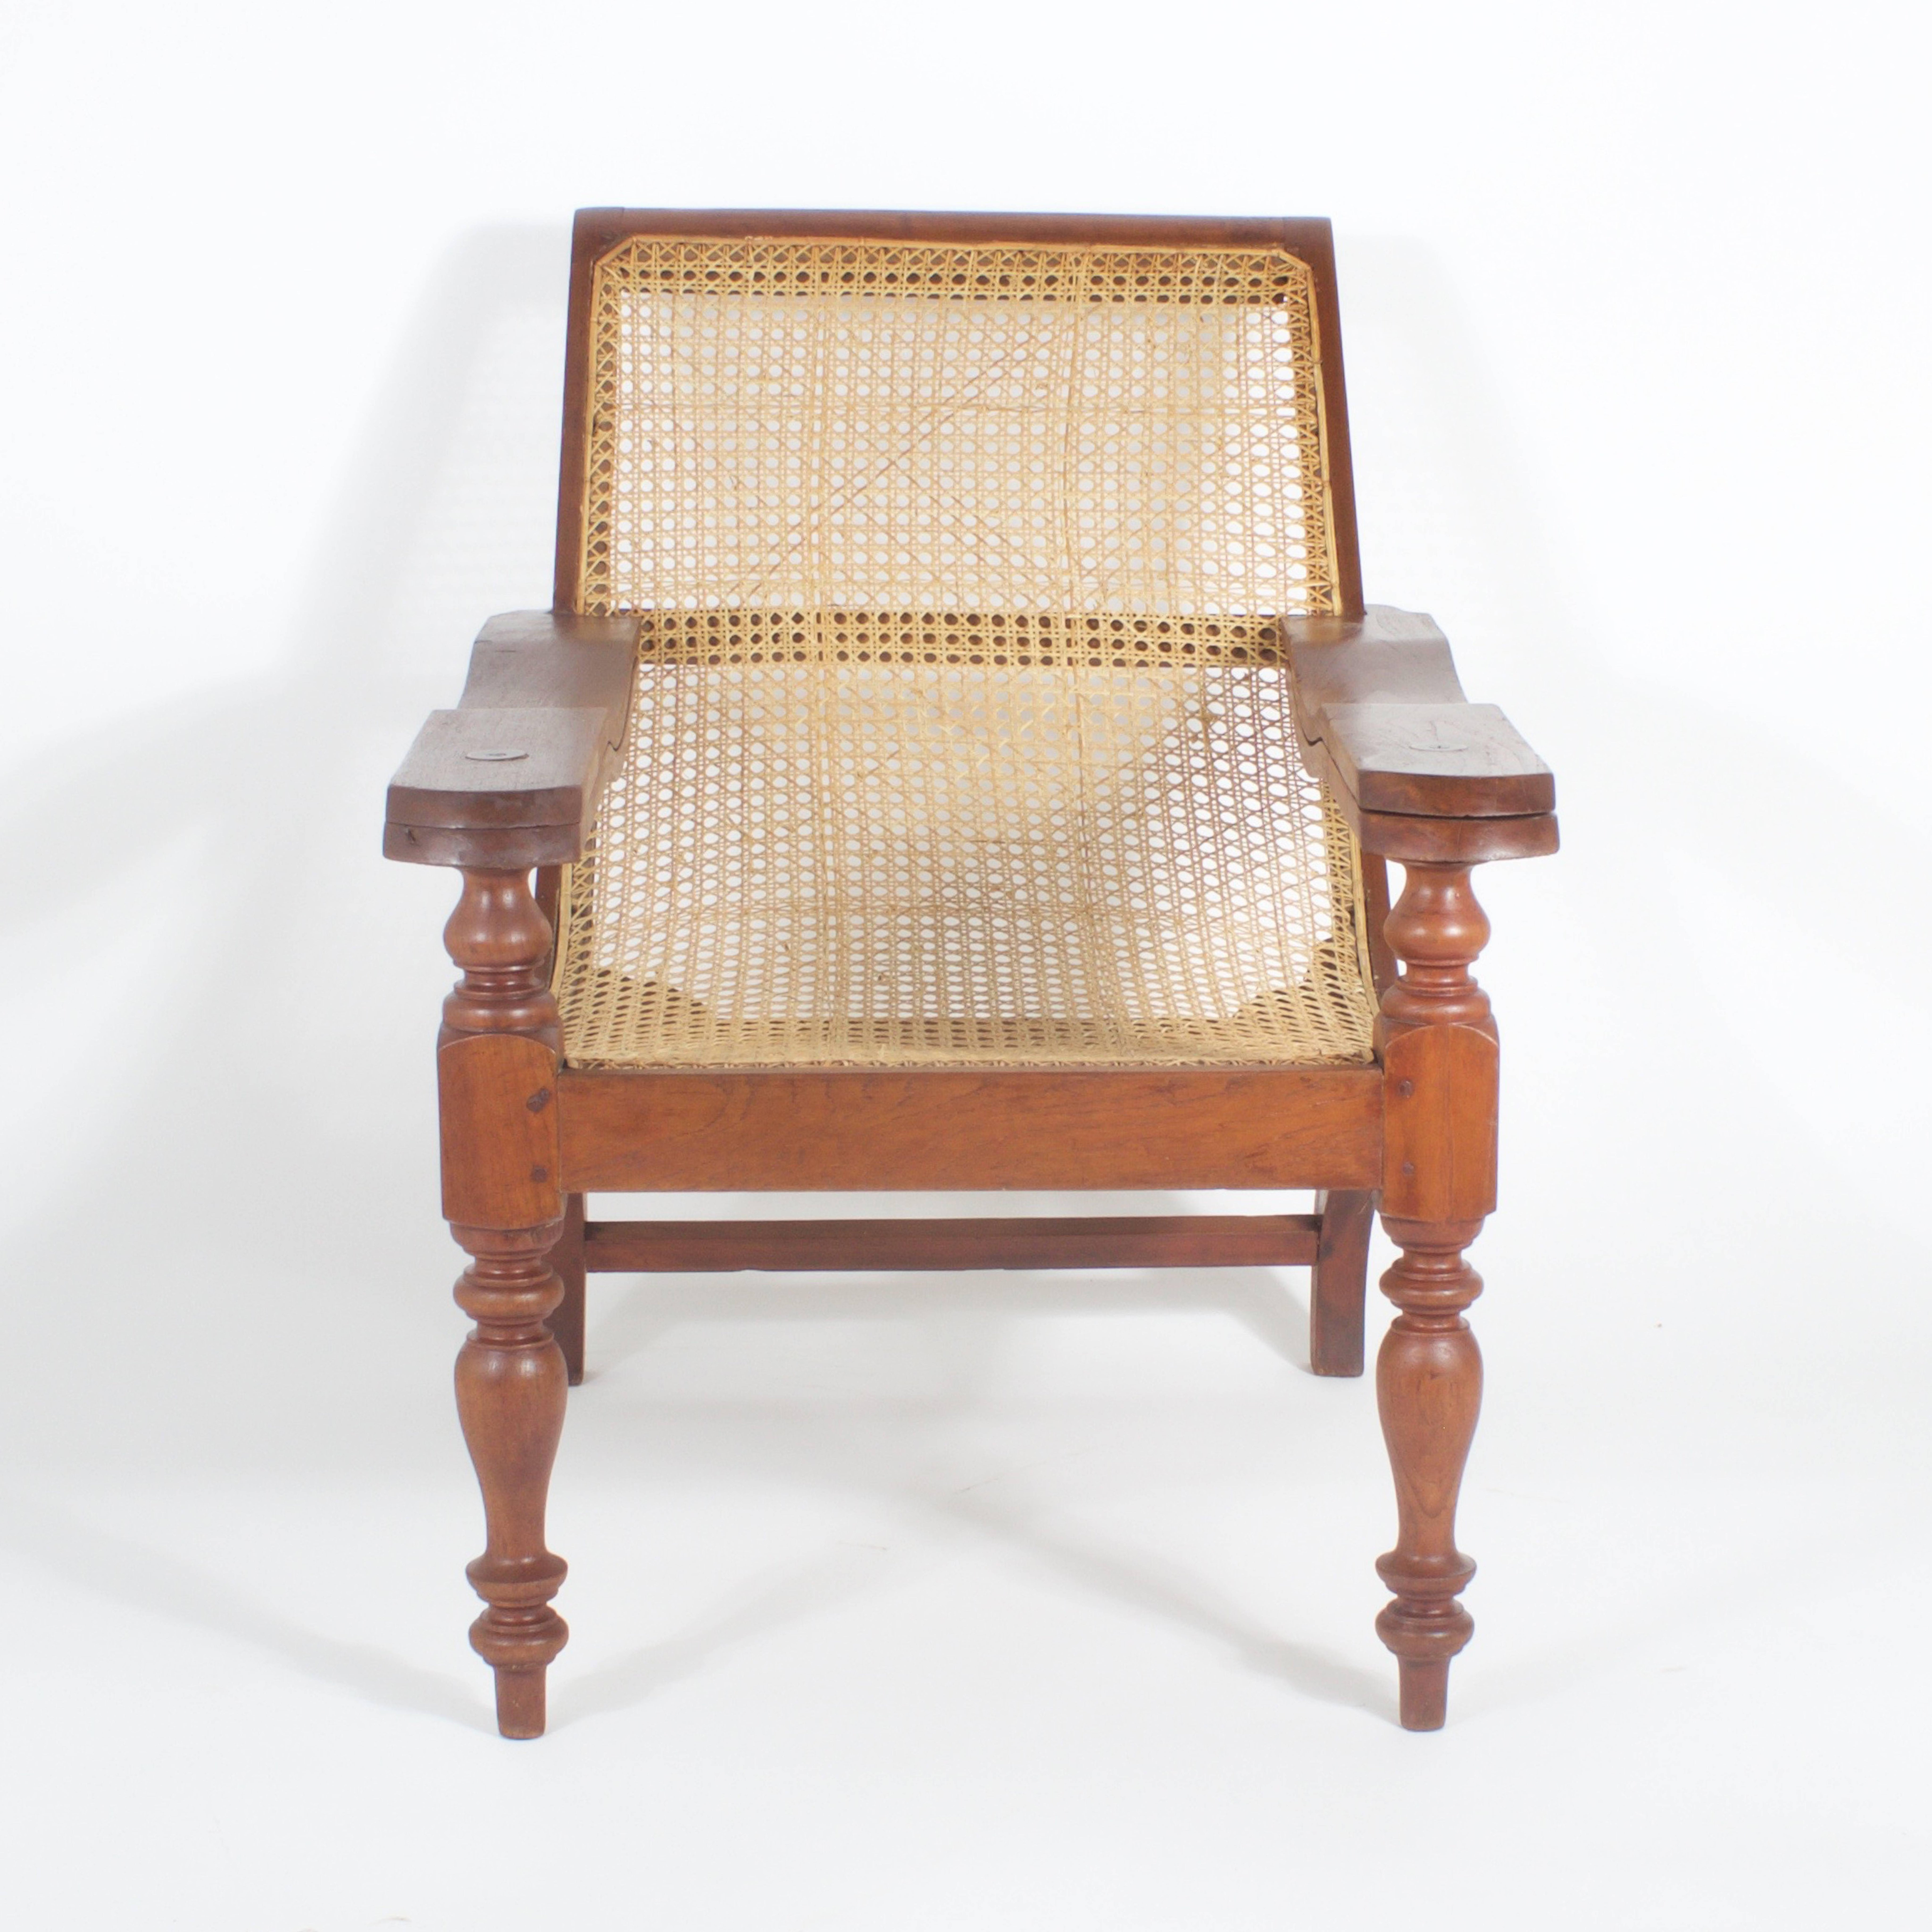 Antique British Colonial mahogany plantation or planters chair with caned seat and back. Featuring pegged construction and turn classical legs and arm supports. This plantation chair has the added unusual bowed arm and extension. Elegant form and